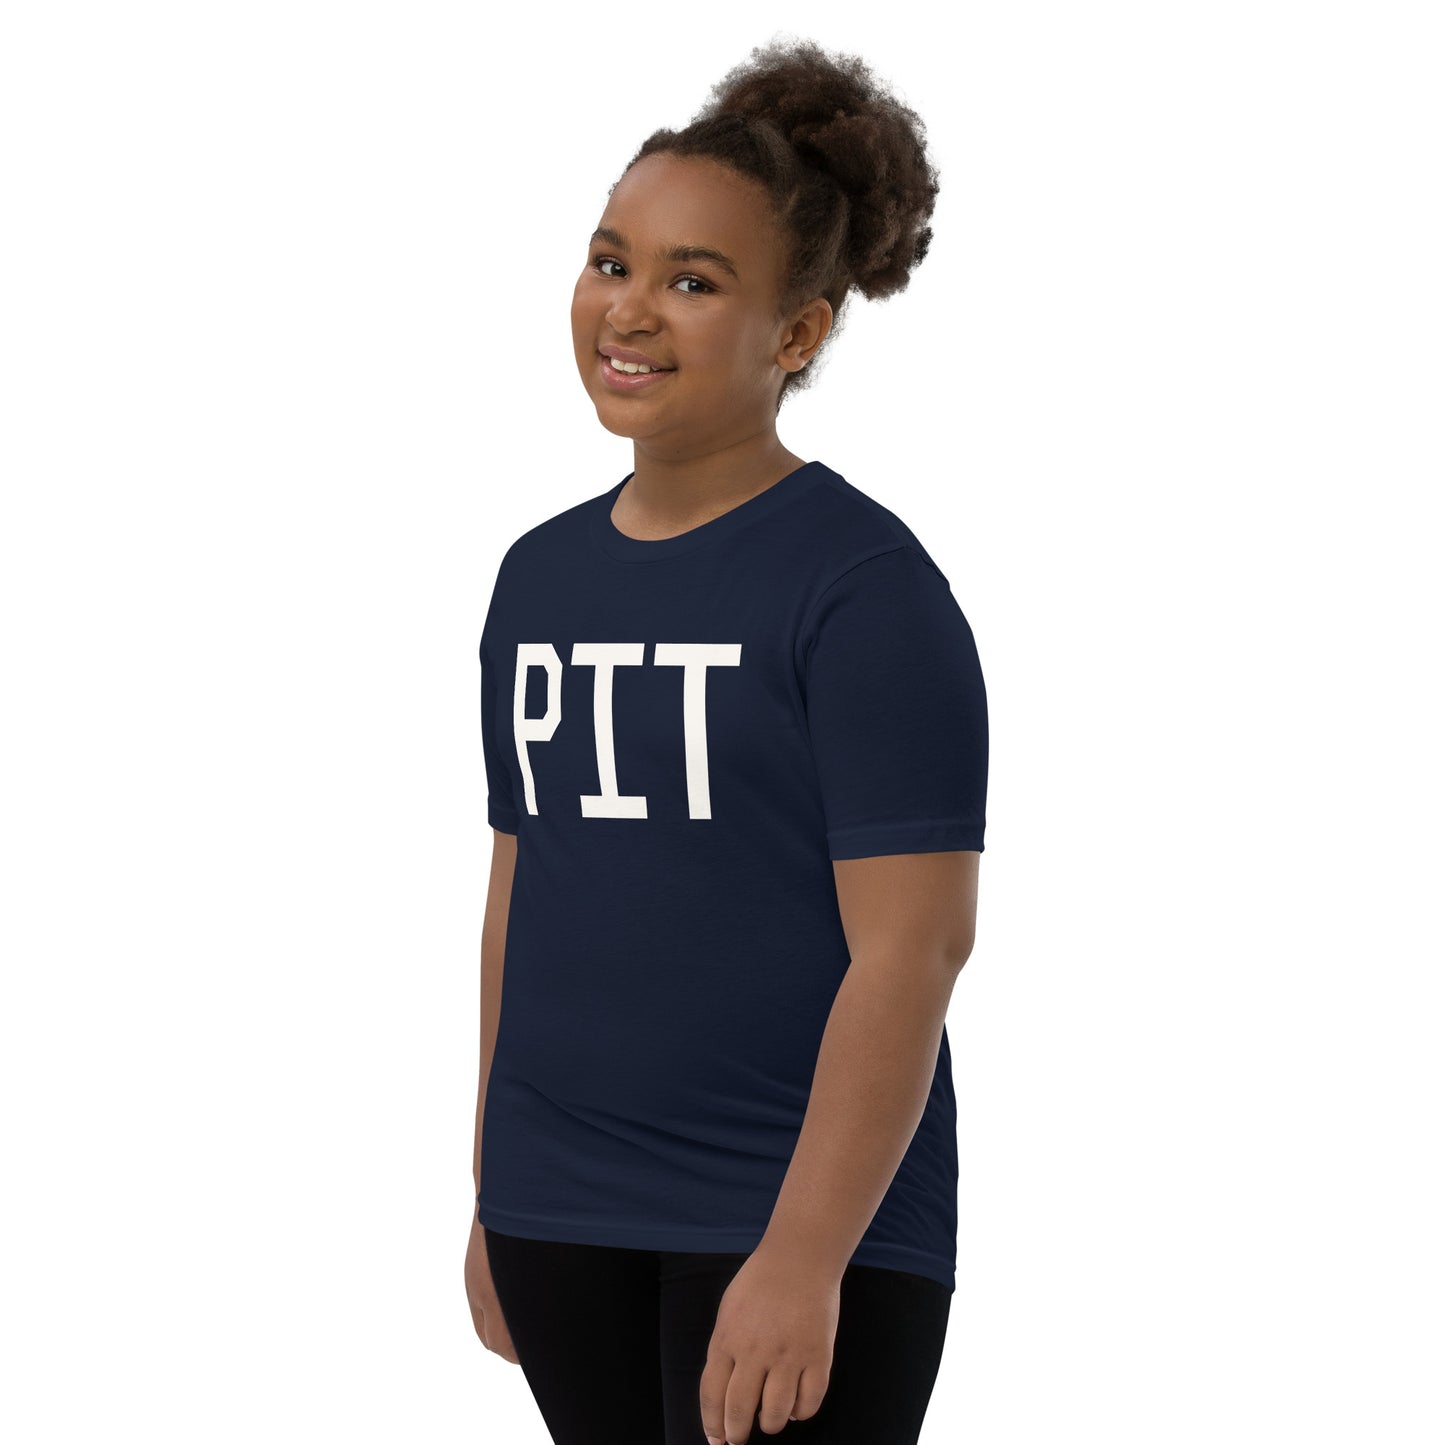 Kid's T-Shirt - White Graphic • PIT Pittsburgh • YHM Designs - Image 02